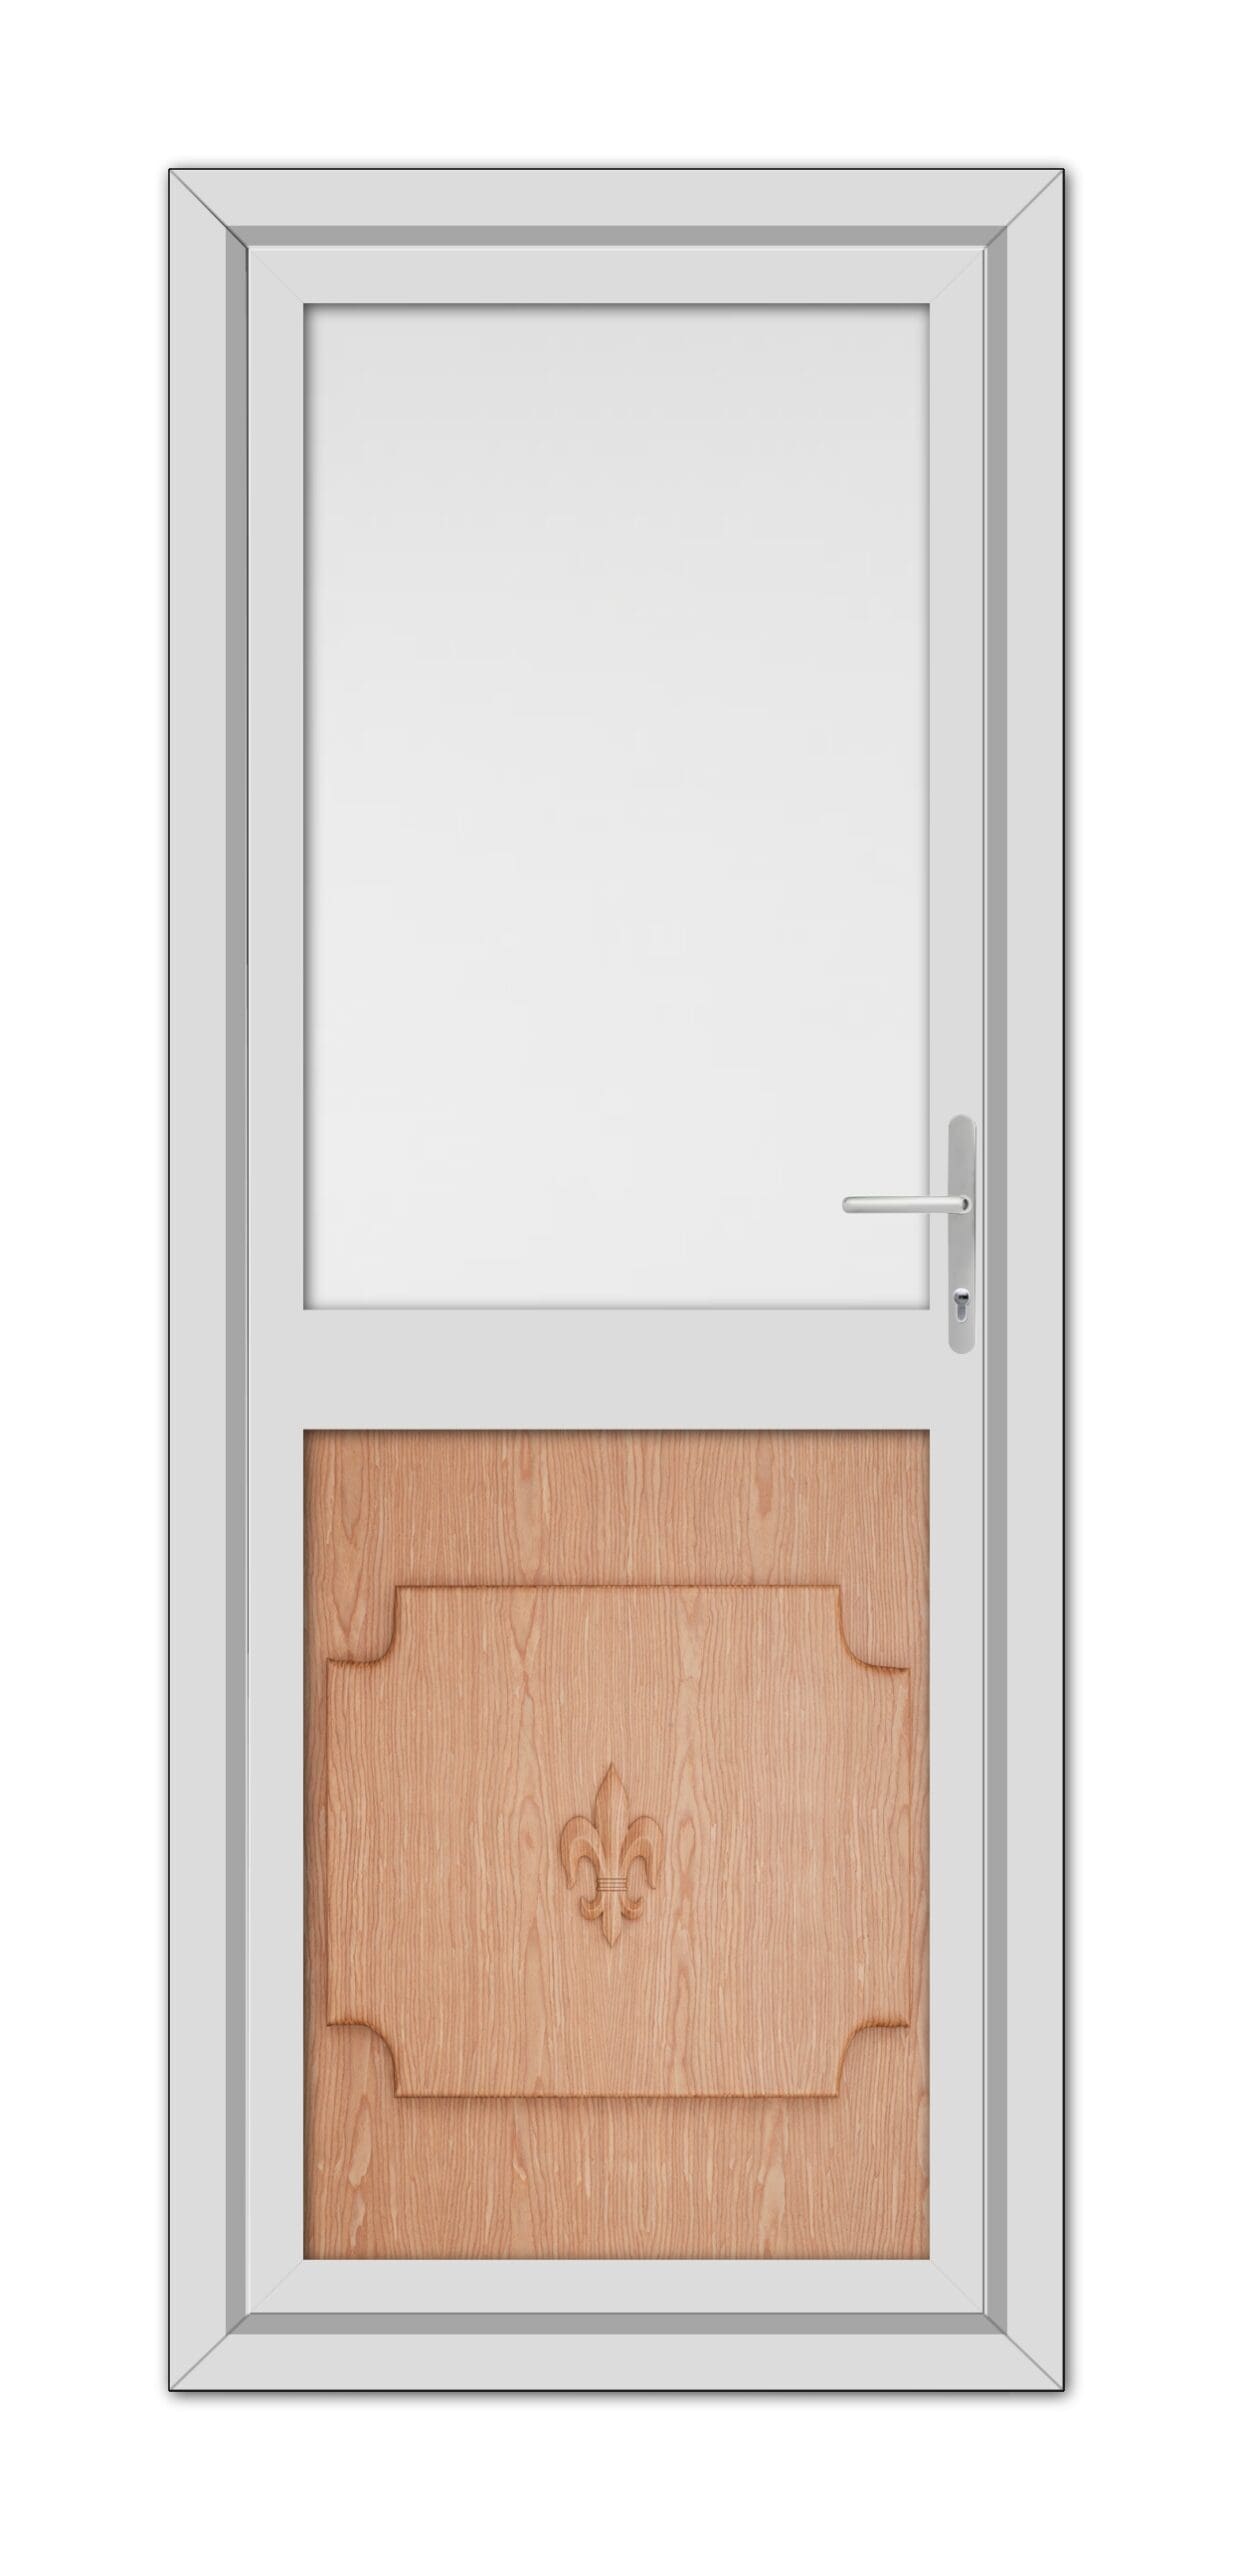 A white-framed Irish Oak Abbey Half uPVC Back Door with a closed wooden shutter featuring a fleur-de-lis design, isolated on a white background.